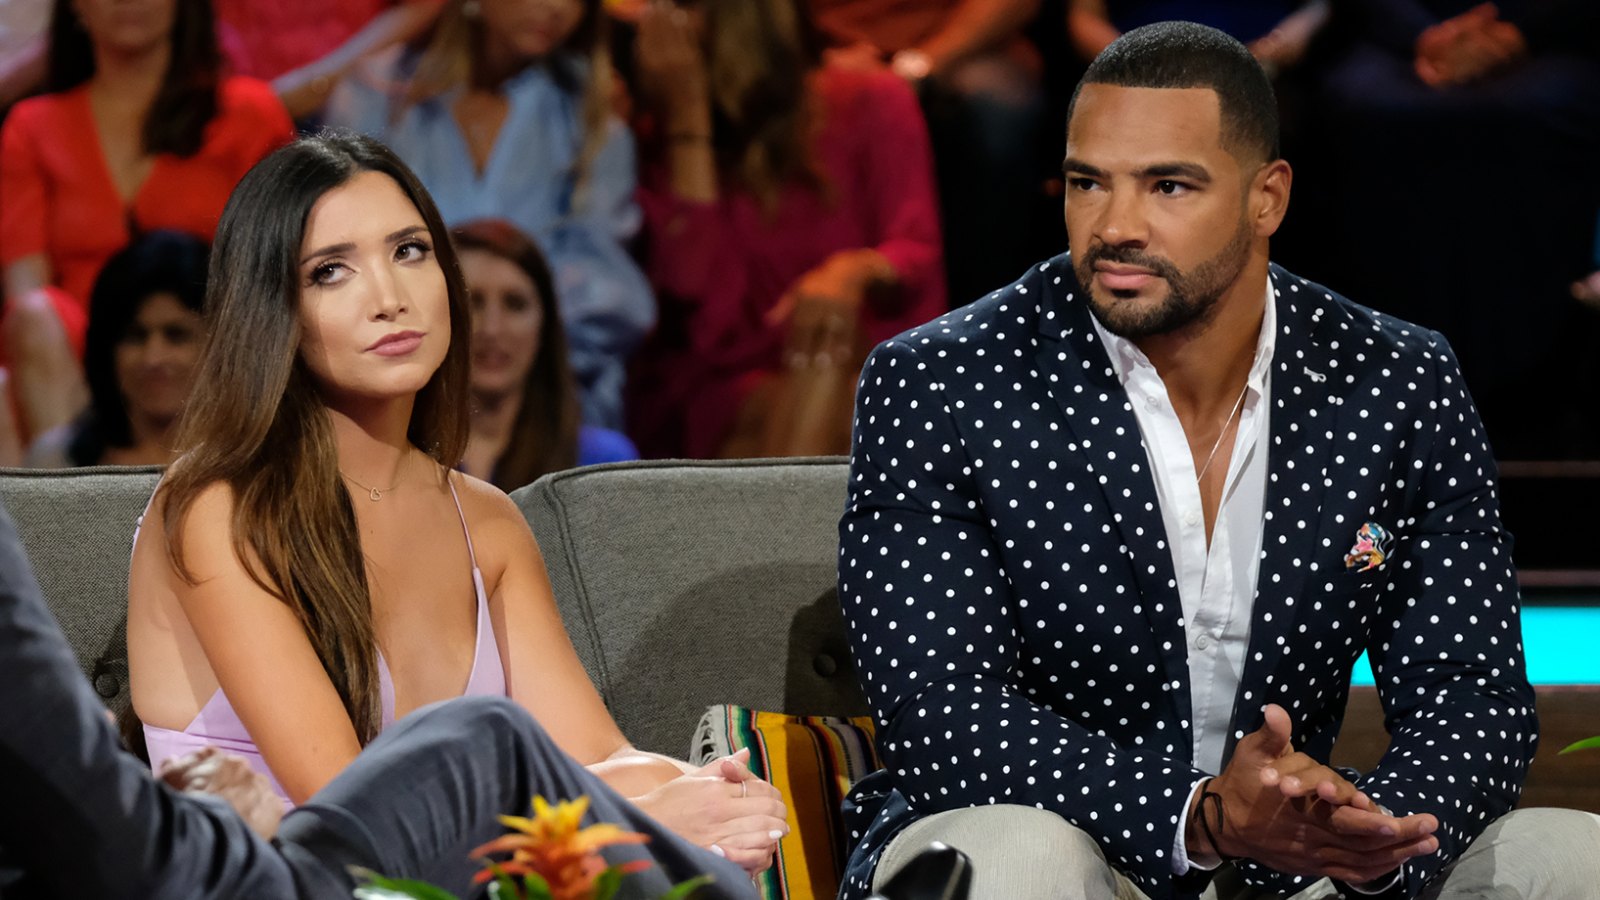 Clay Harbor Fires Back After ‘Bachelor in Paradise’ Ex Nicole Lopez-Alvar Slams His NFL Career